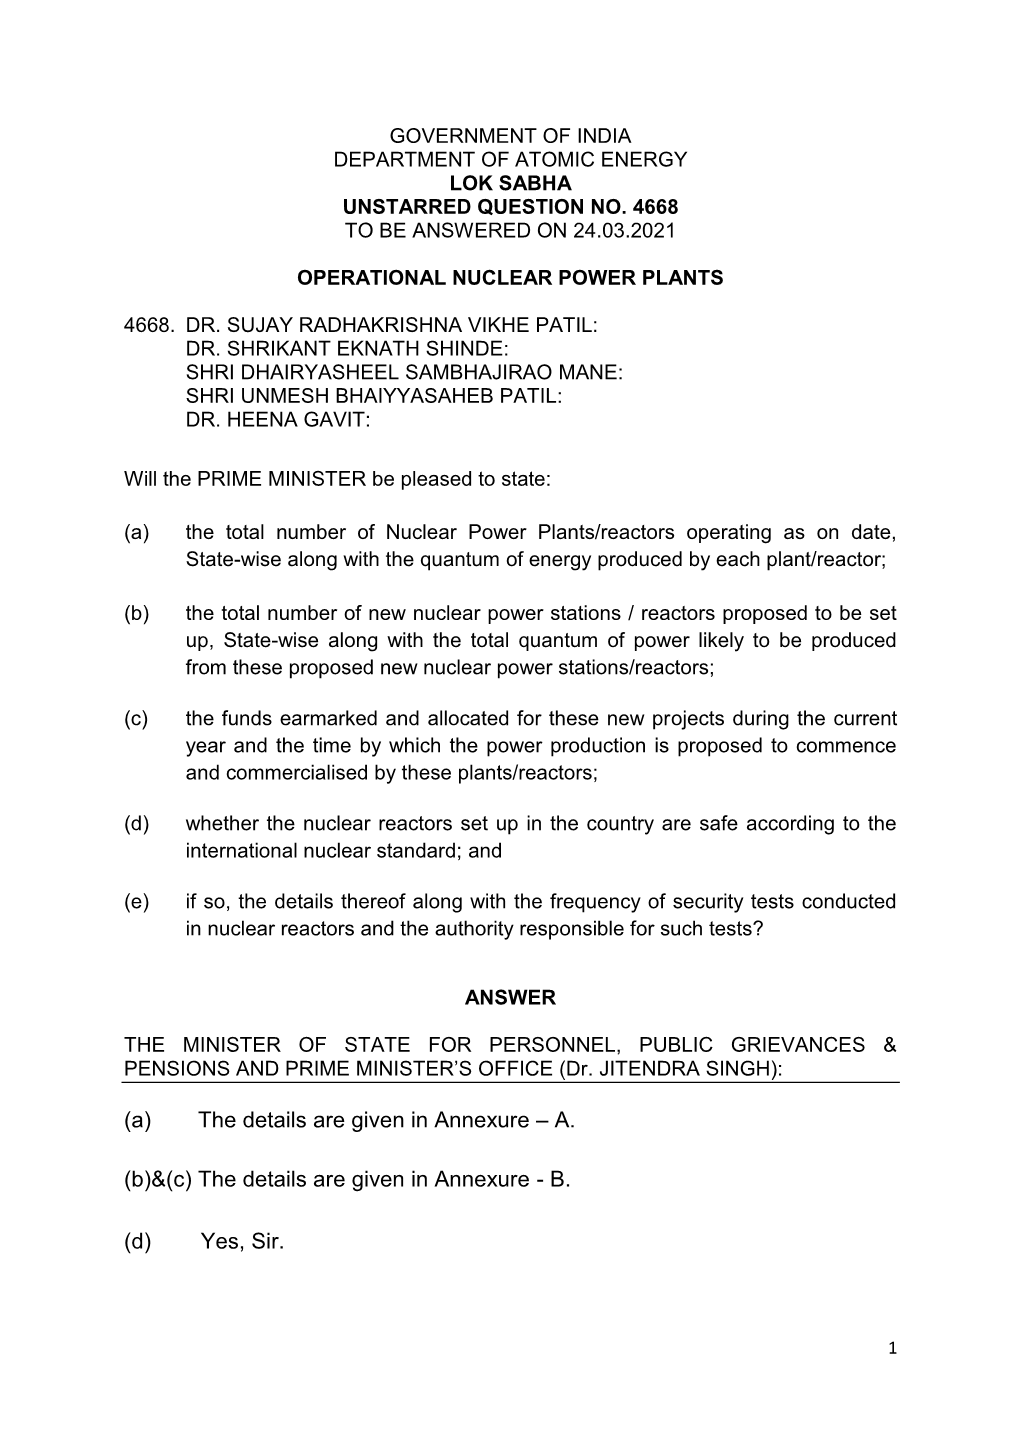 Operational Nuclear Power Plants